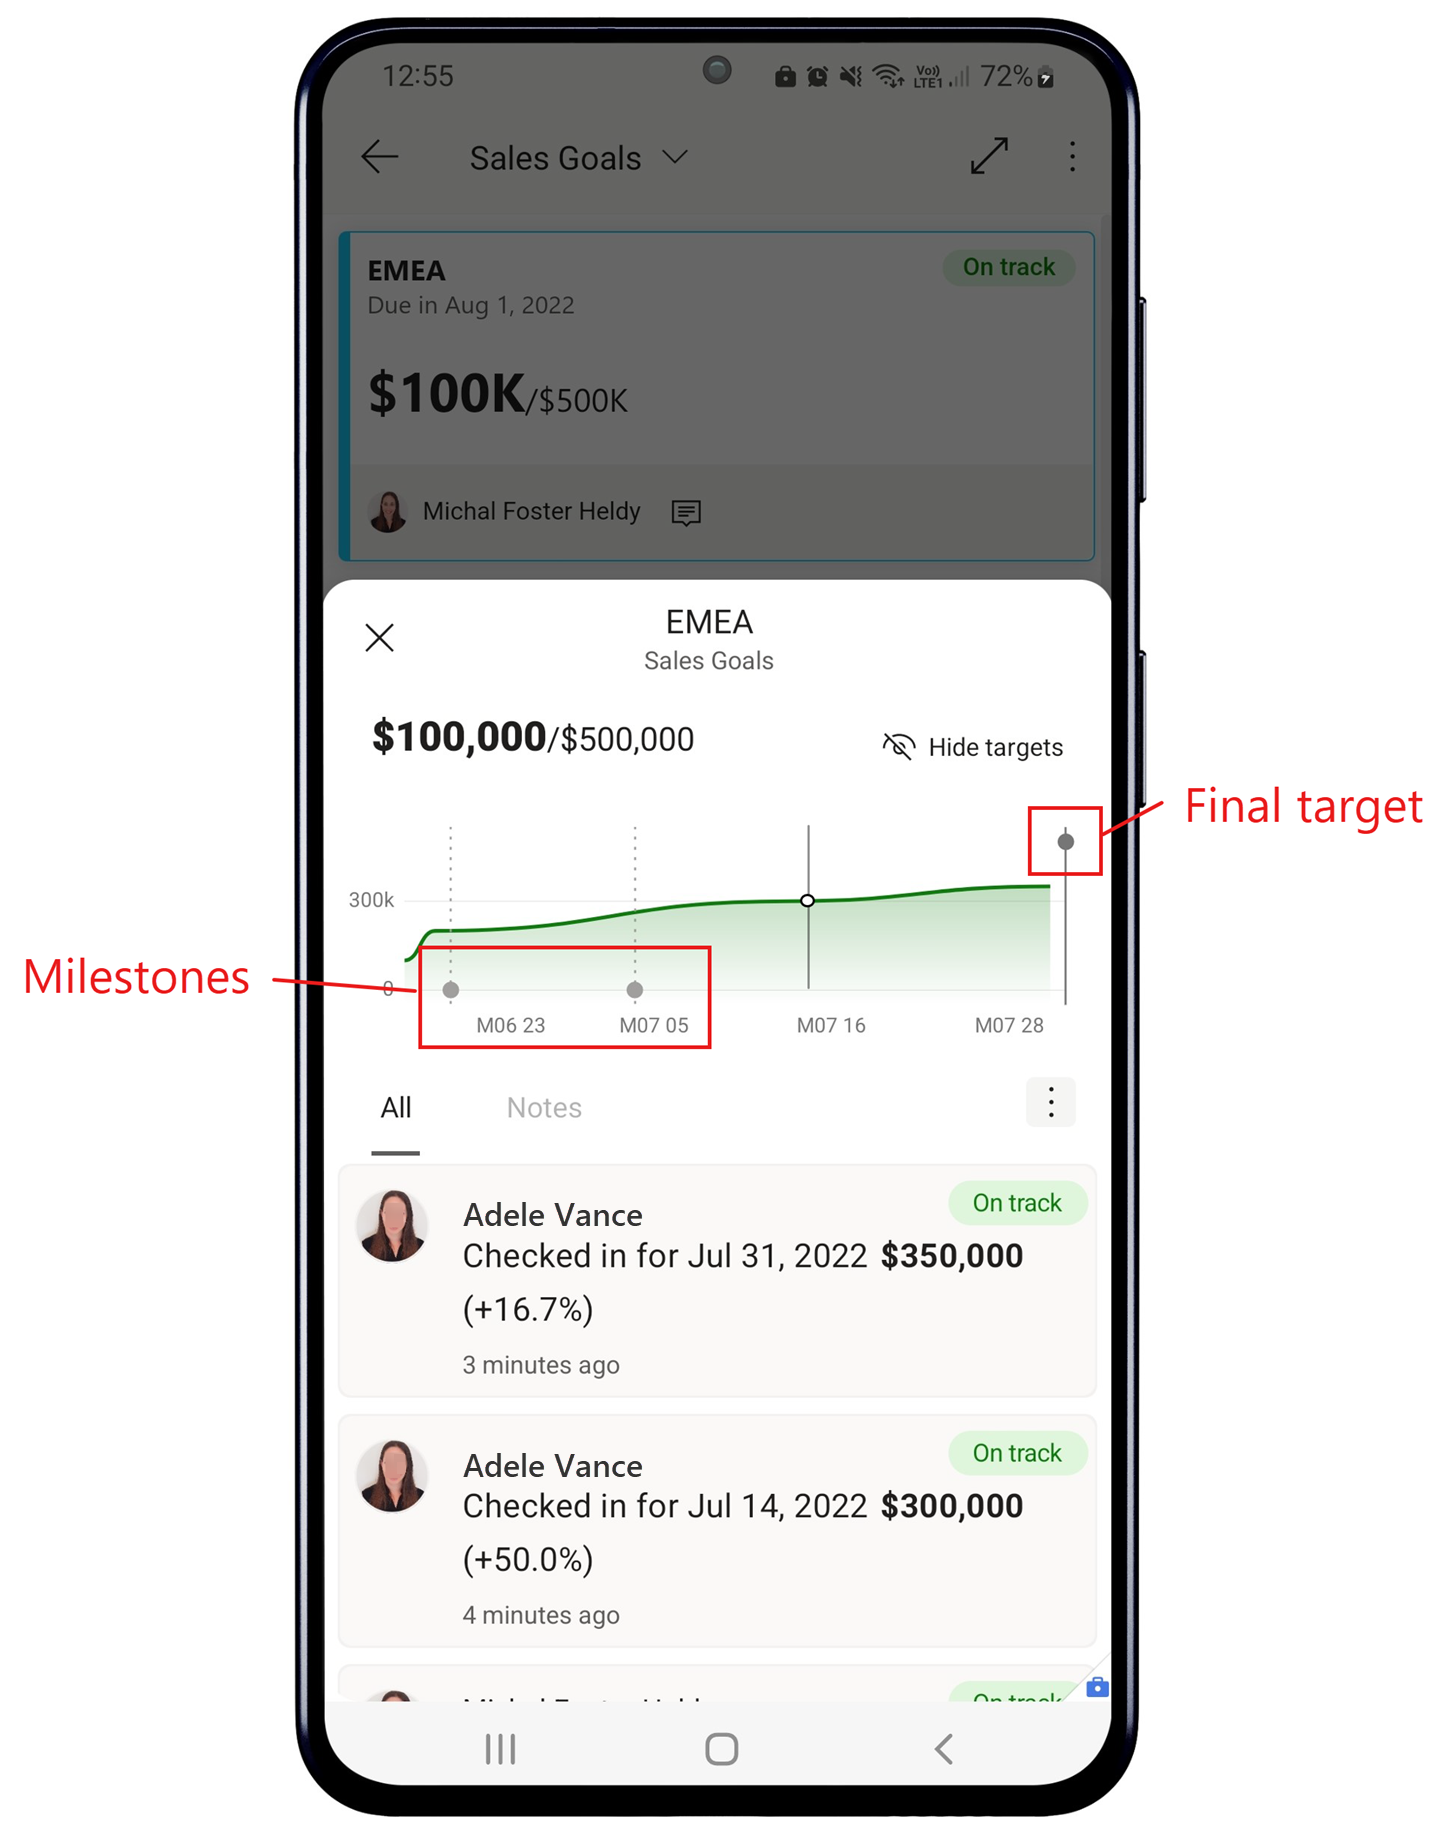 Screenshot of a metric's details pane in the mobile app showing multiple milestones.